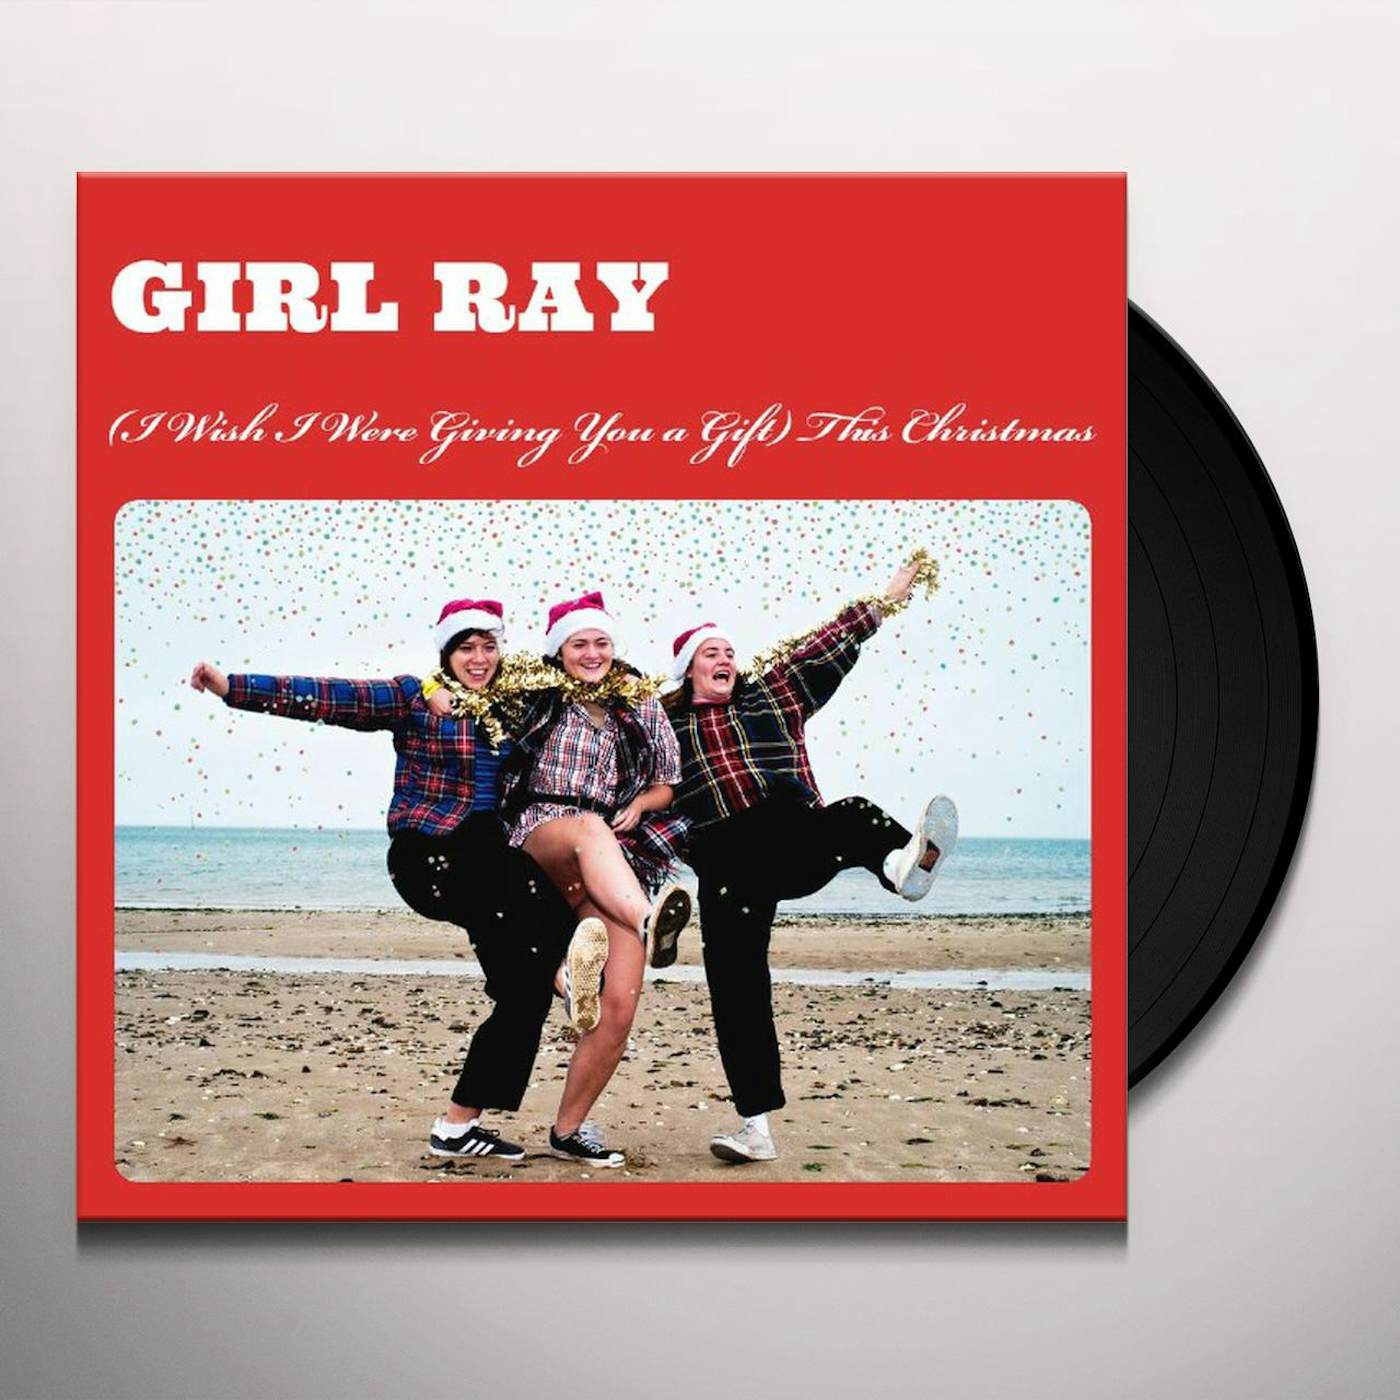 Girl Ray (I Wish I Were Giving You a Gift) This Christmas Vinyl Record